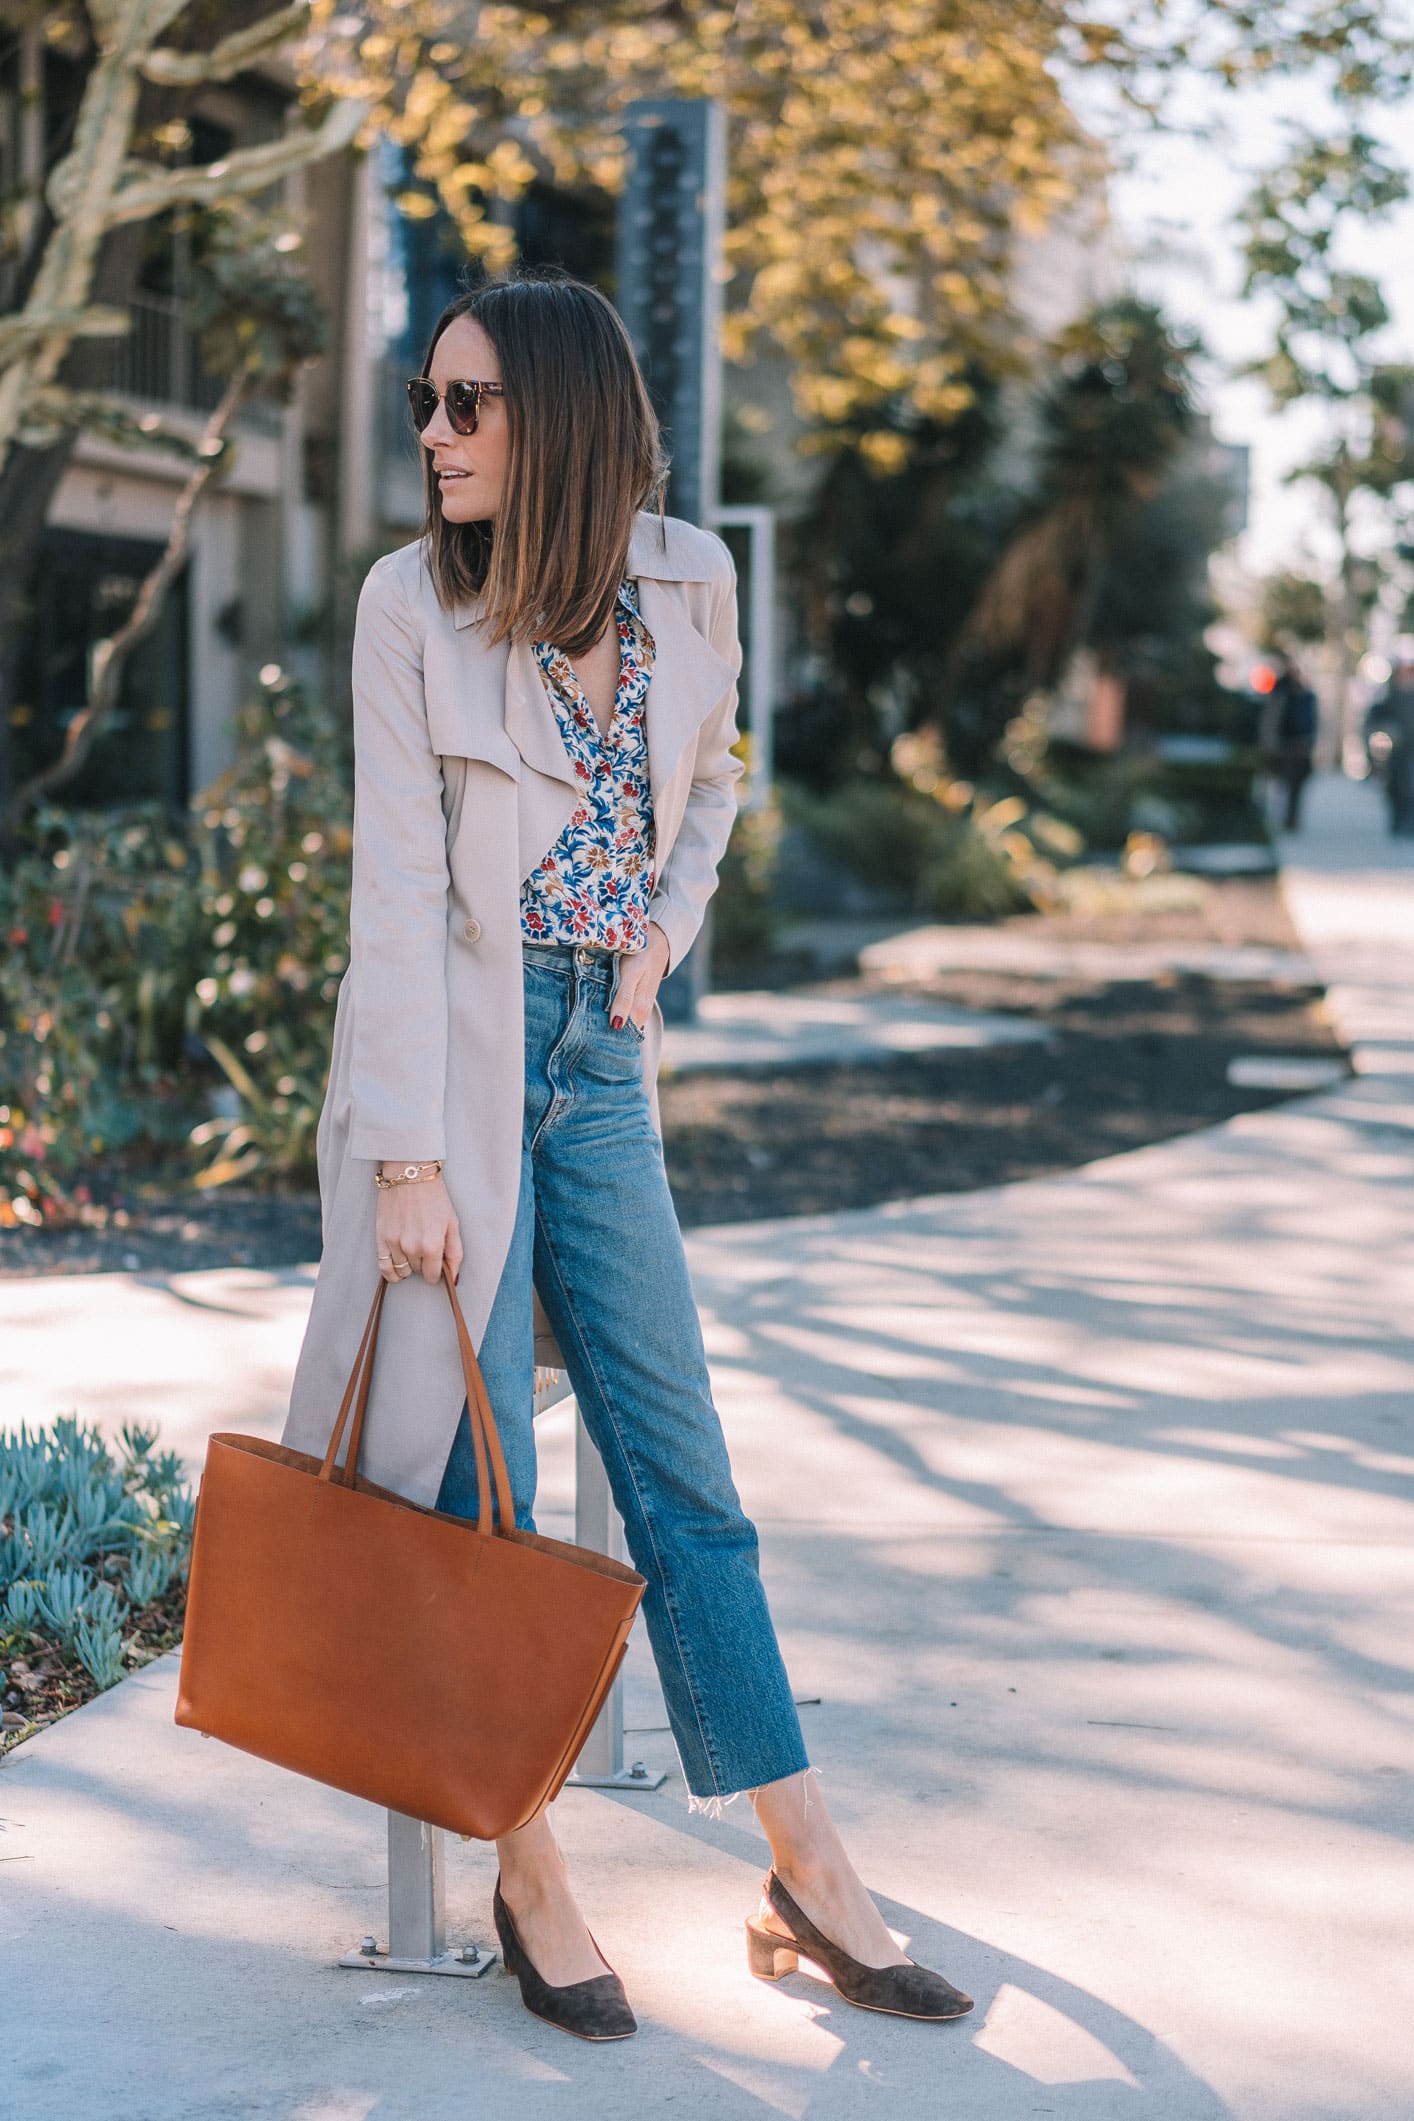 Louise Roe Wearing A Trench Coat and Jeans